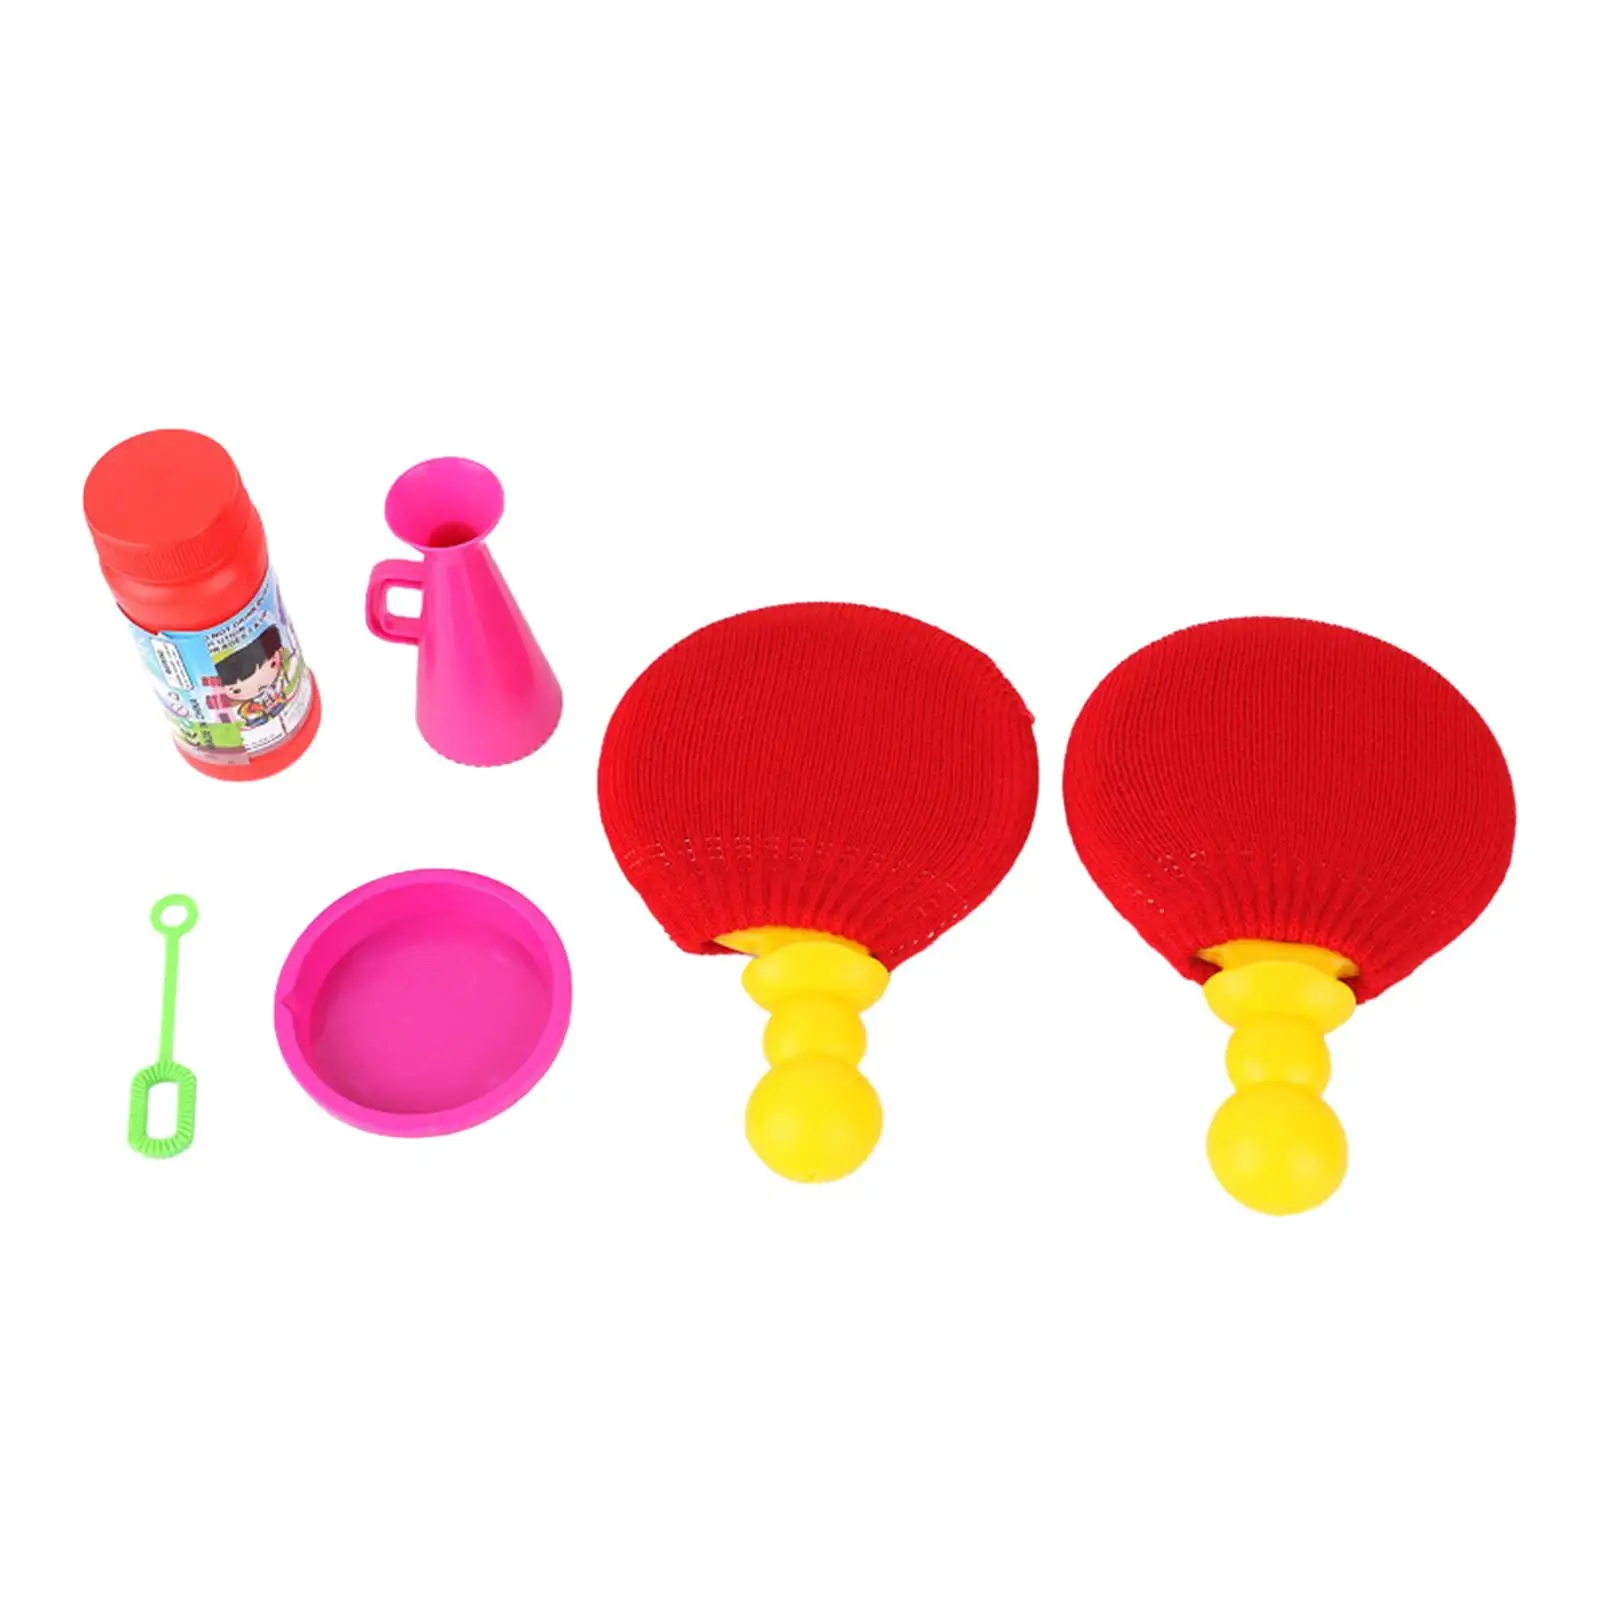 Big Bubble Maker Game Indoor and Play Ping Pong Game with Soap Bubble for Kids Children Girls Boys Toddlers Great Gift